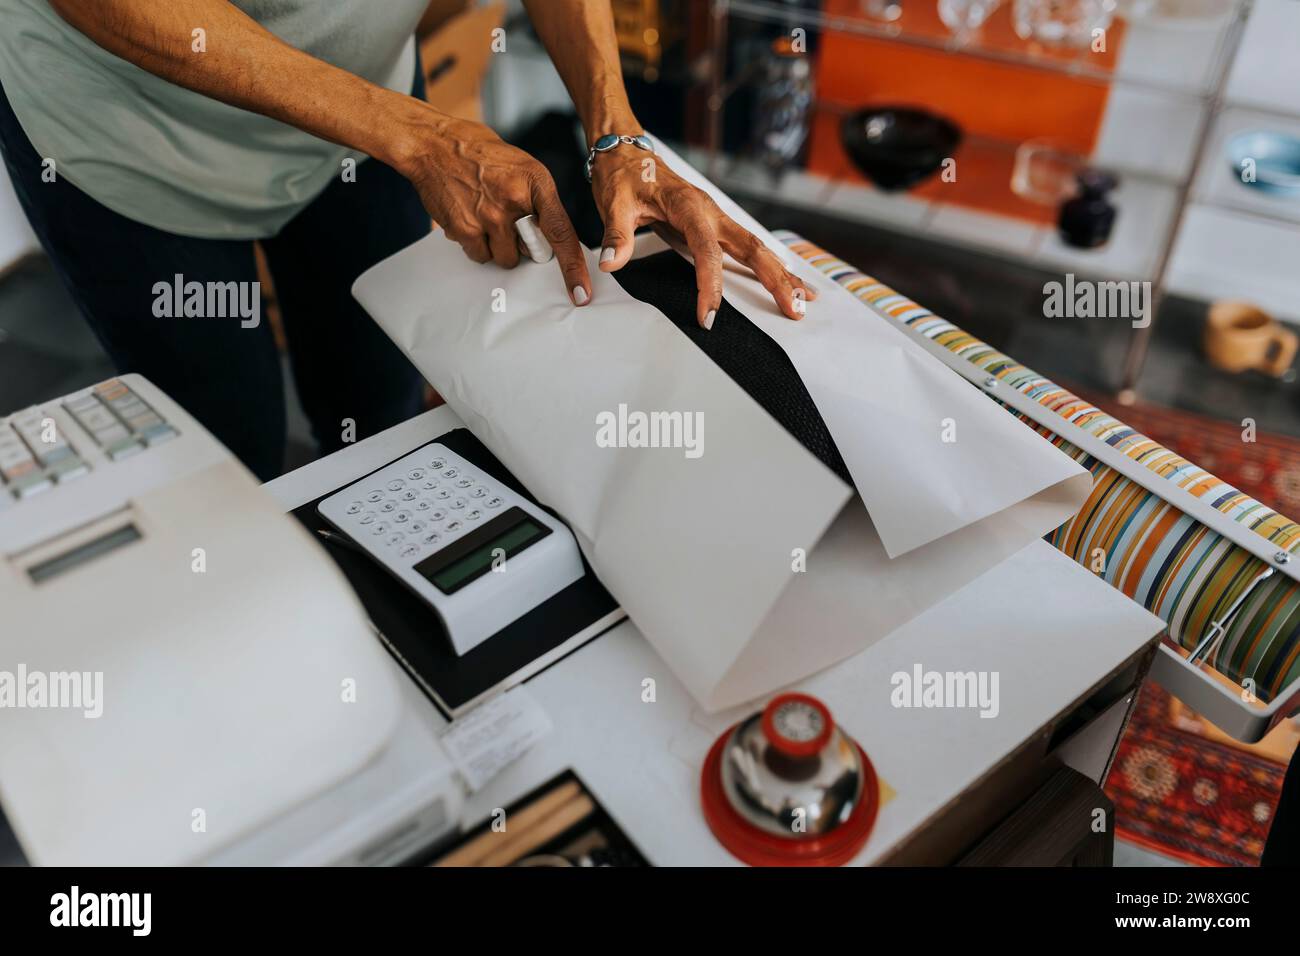 Midsection of saleswoman wrapping product at checkout in antique shop Stock Photo